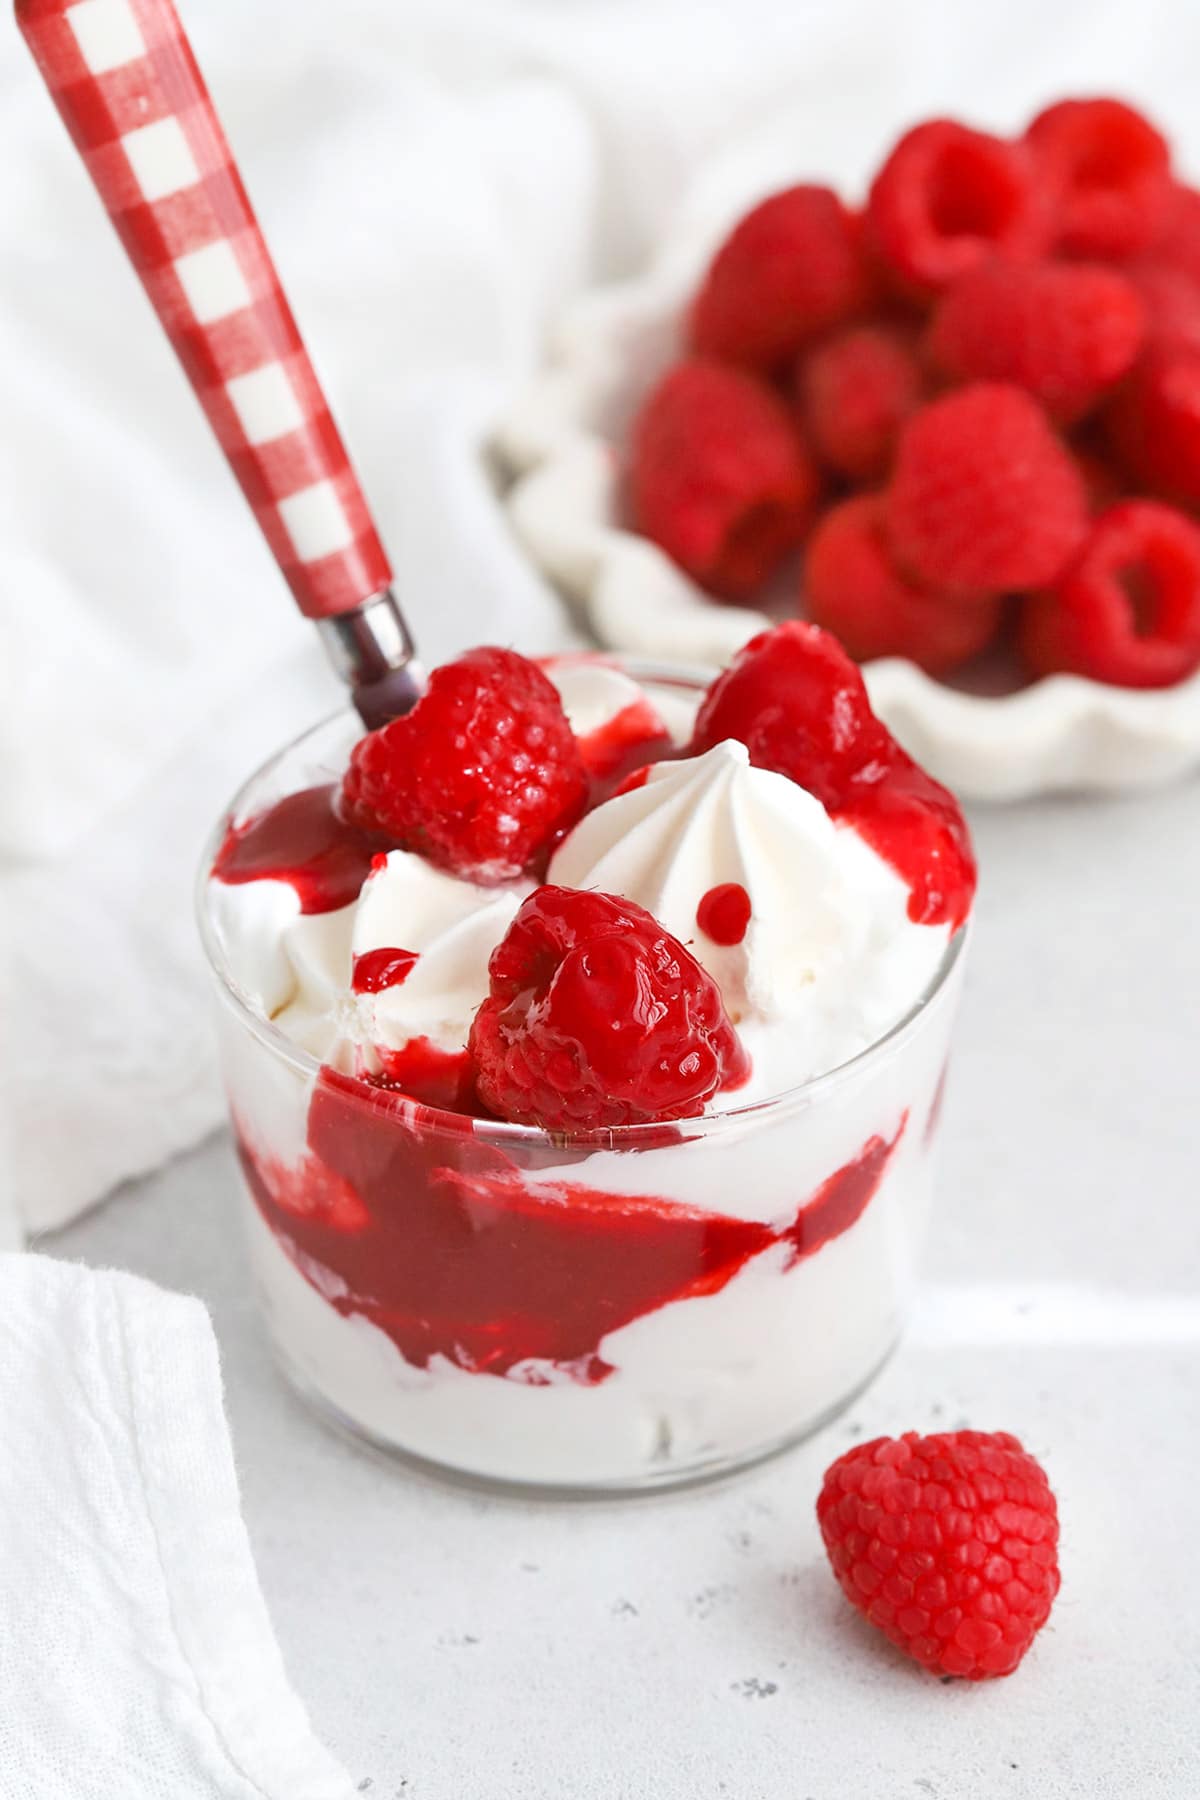 Front view of raspberry Eton mess made with mini meringues, raspberry sauce, fresh raspberries, and whipped cream